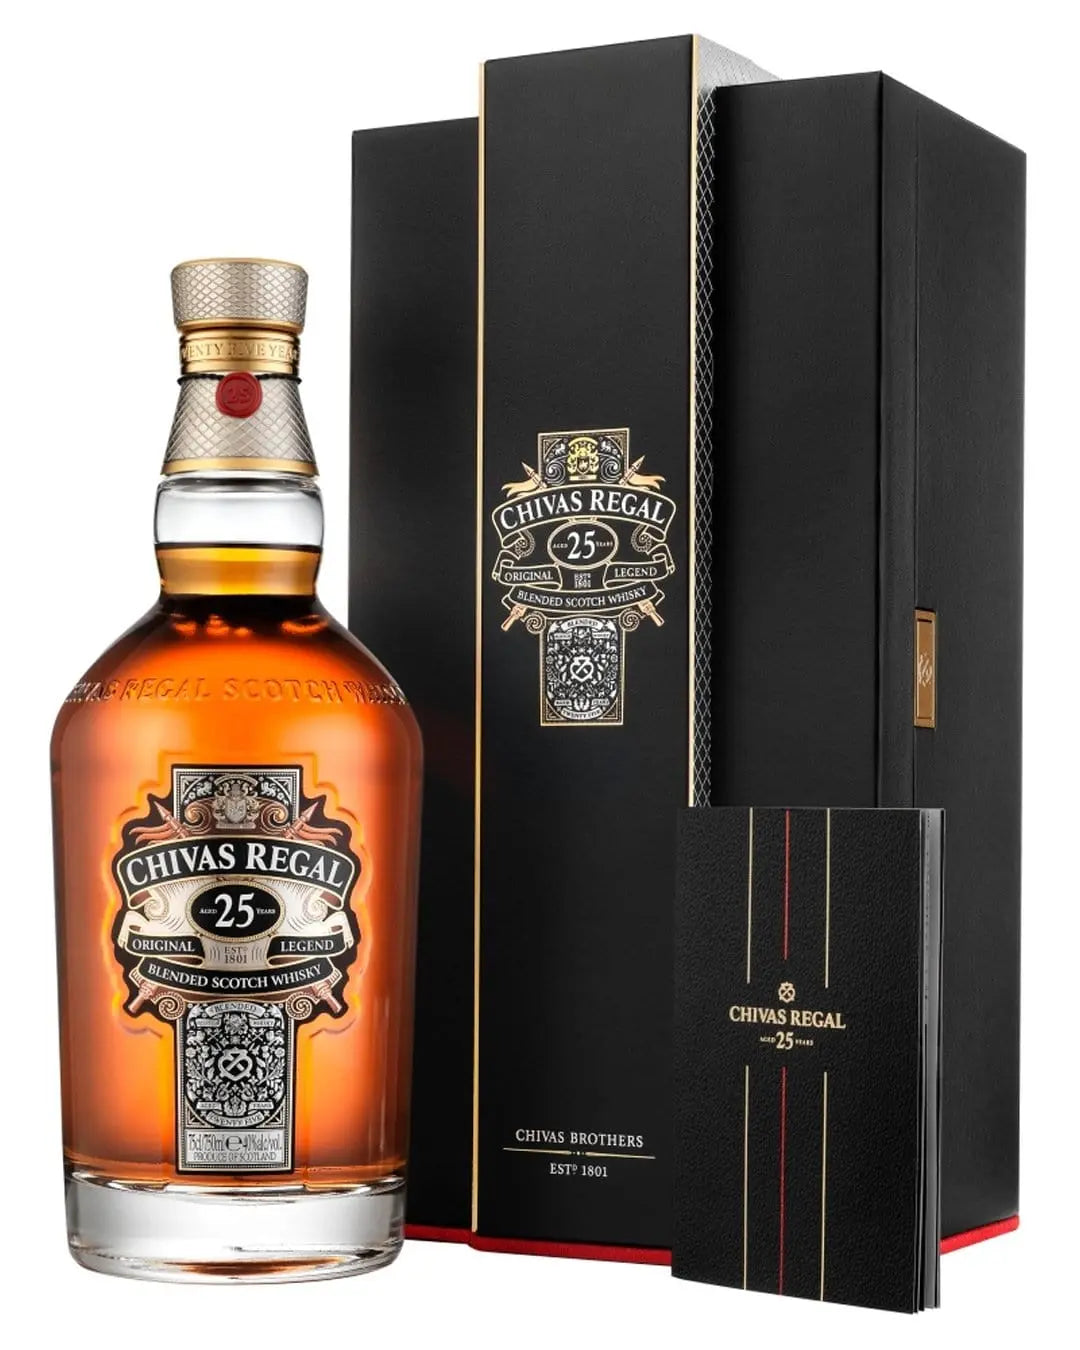 Chivas Regal 25 Year Old Blended Scotch Whisky, 70 cl Whisky 5000299284926